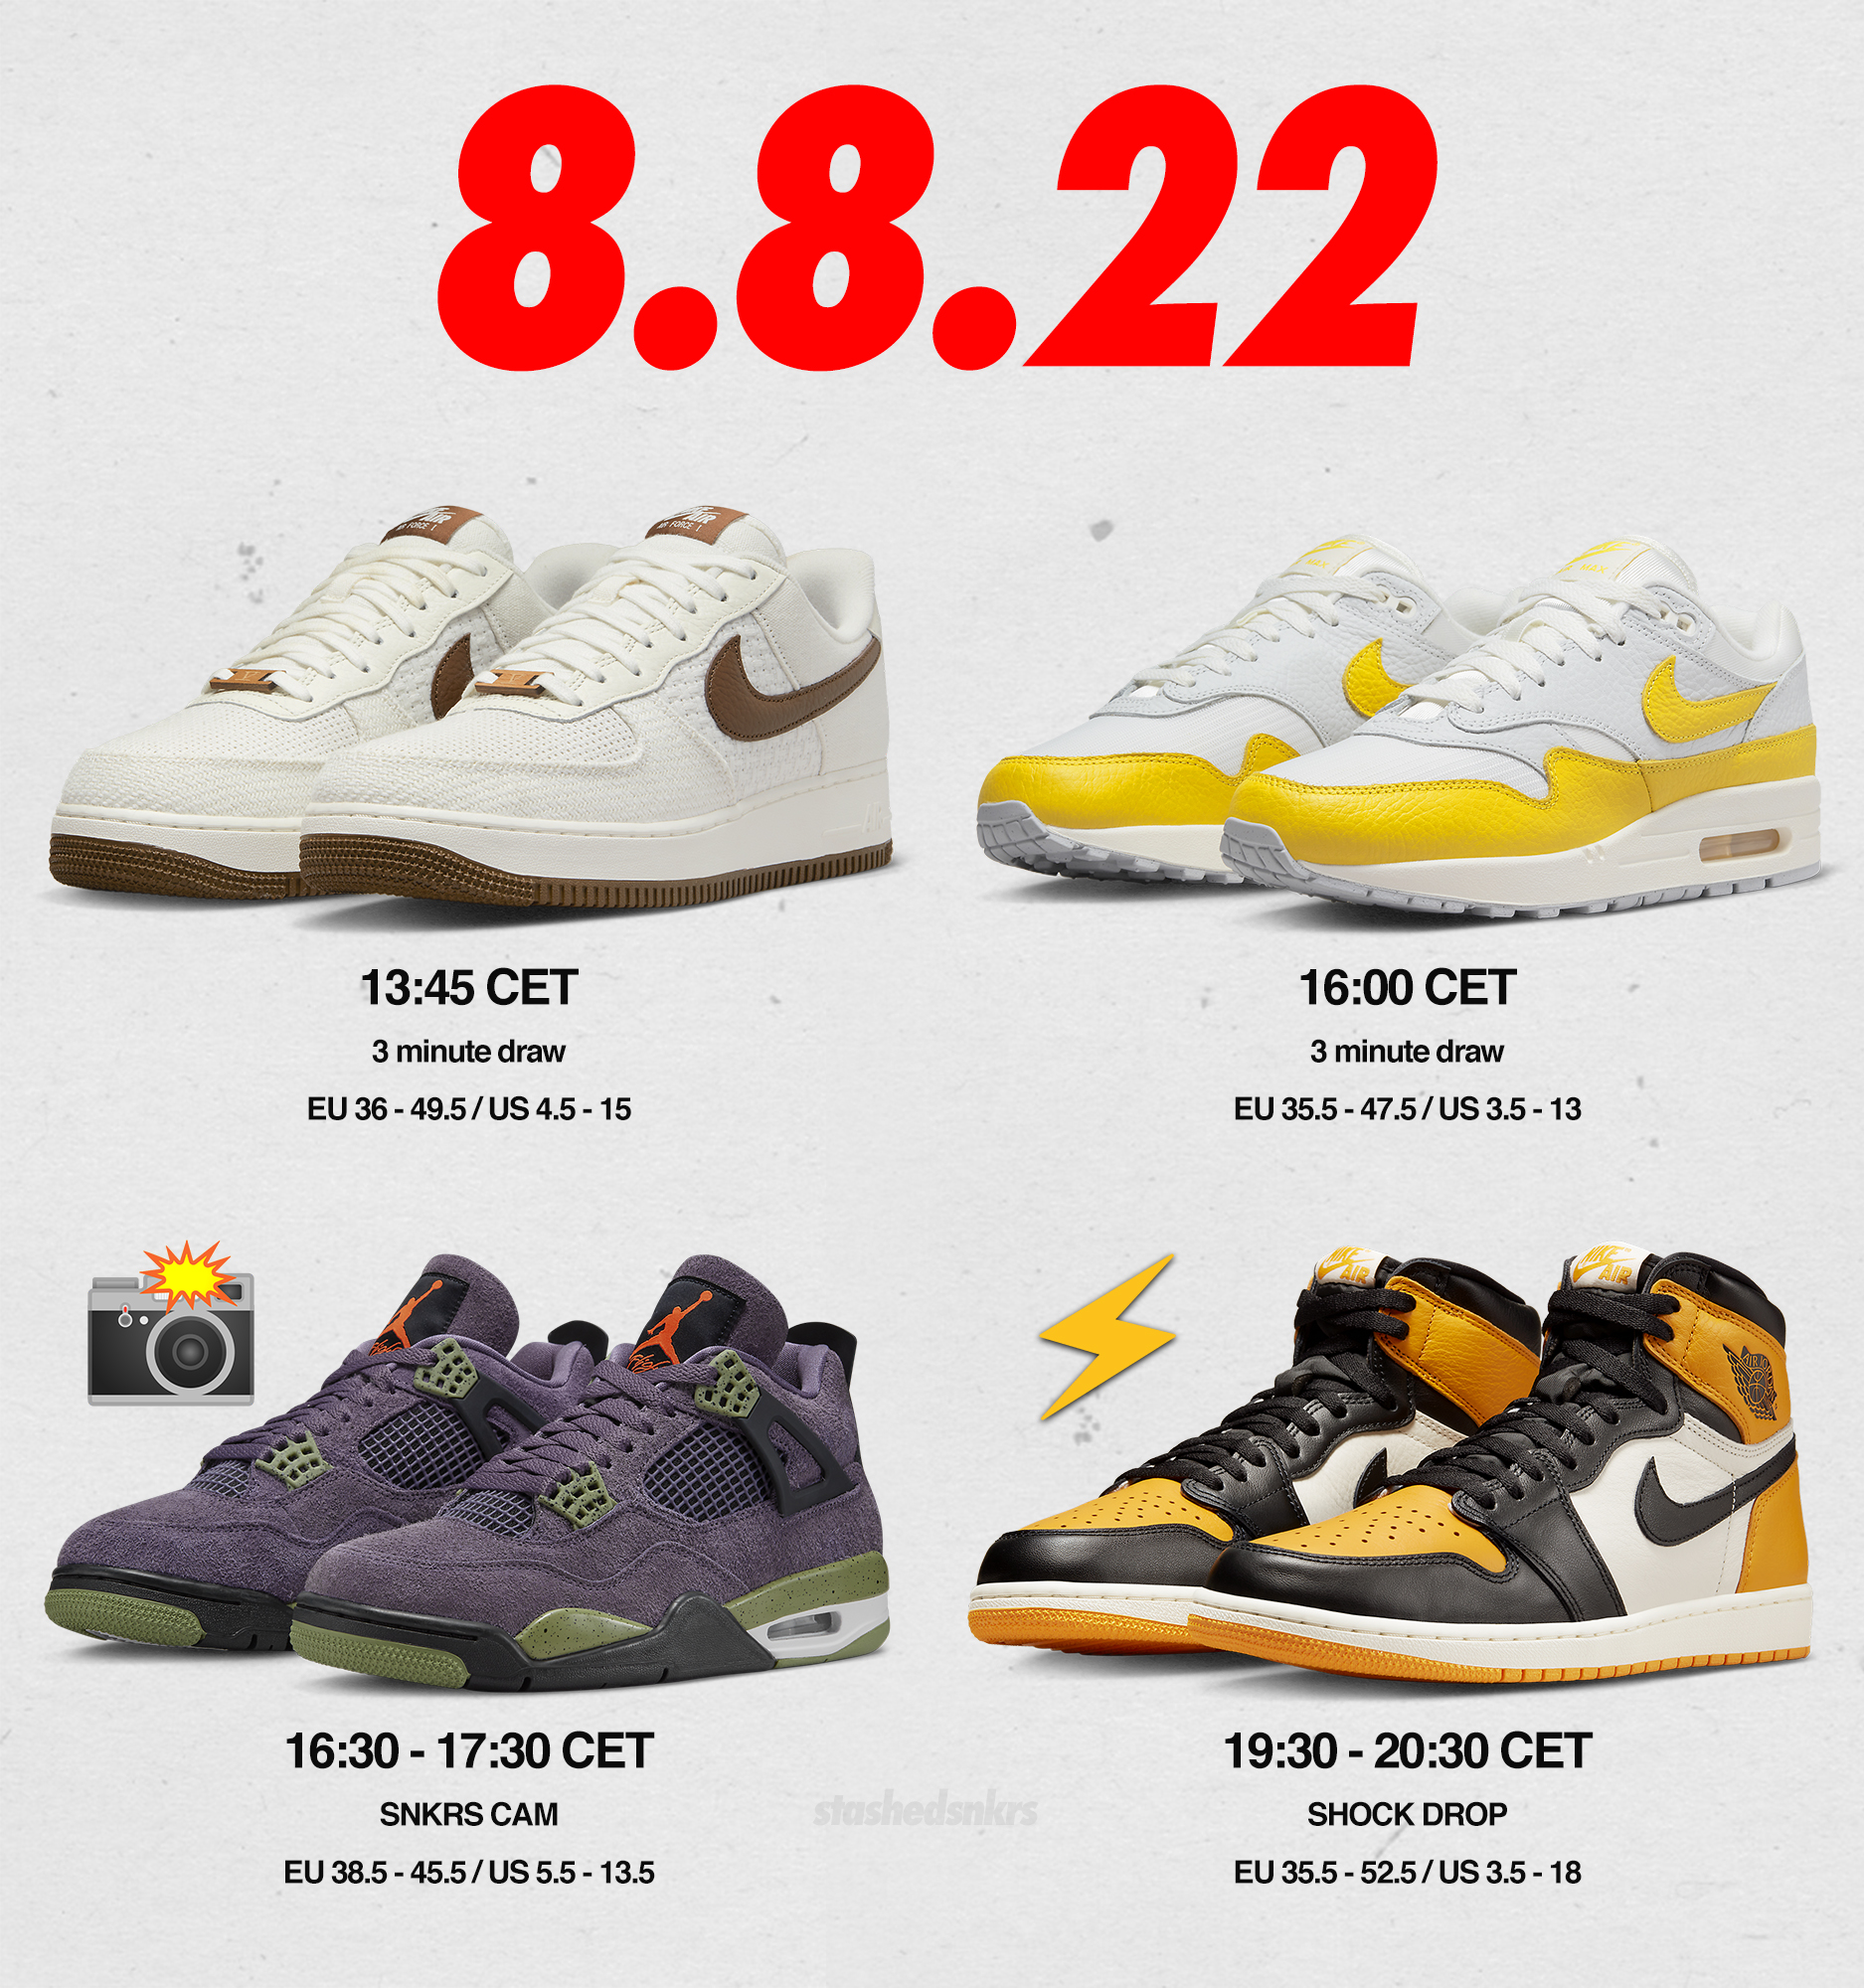 martillo perdonar Letrista Stashed SNKRS on Twitter: "SNKRS DAY 2022 | LINE UP📸⚡️ EUROPE ONLY If you  don't want to see SOLD OUT or DIDN'T GET 'EM tomorrow, join the Stashed  membership. €29,95 /month ·